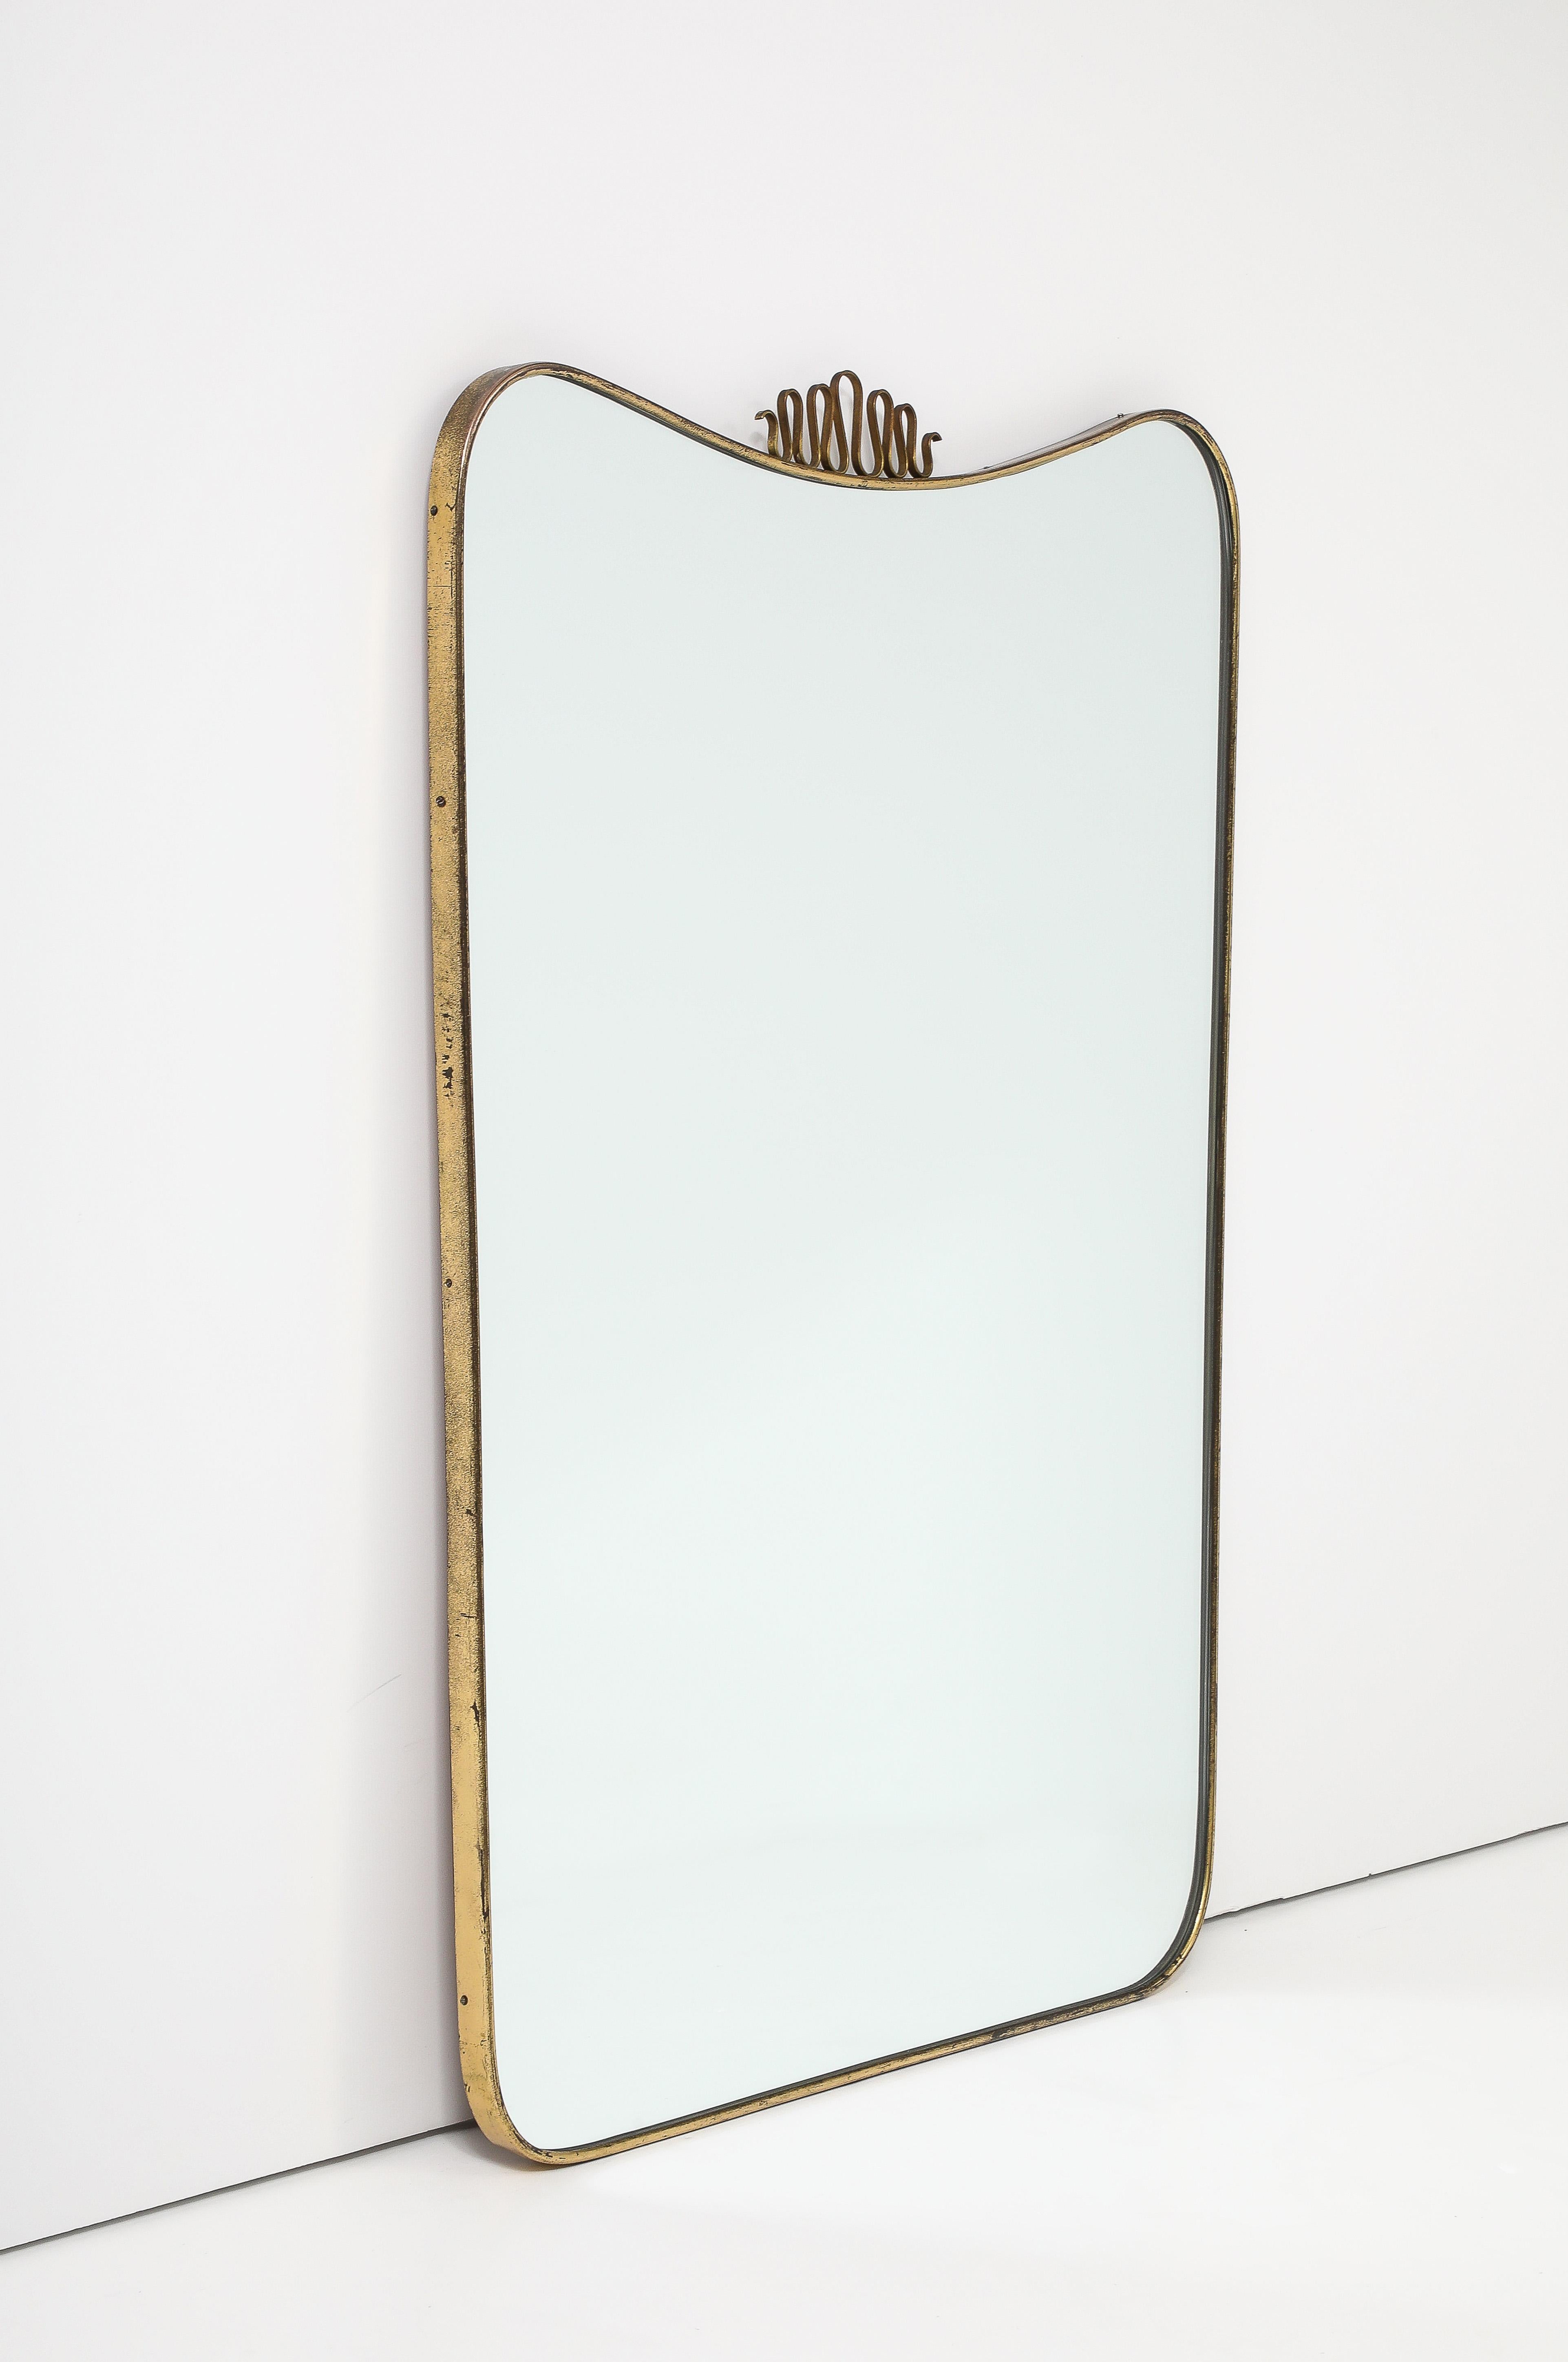 Midcentury Italian shaped brass mirror with central elegant decorative brass element on slightly arched and curved top slightly tapering down towards the bottom with rounded sides, in the style of Gio Ponti. This iconic and lyrical scroll top